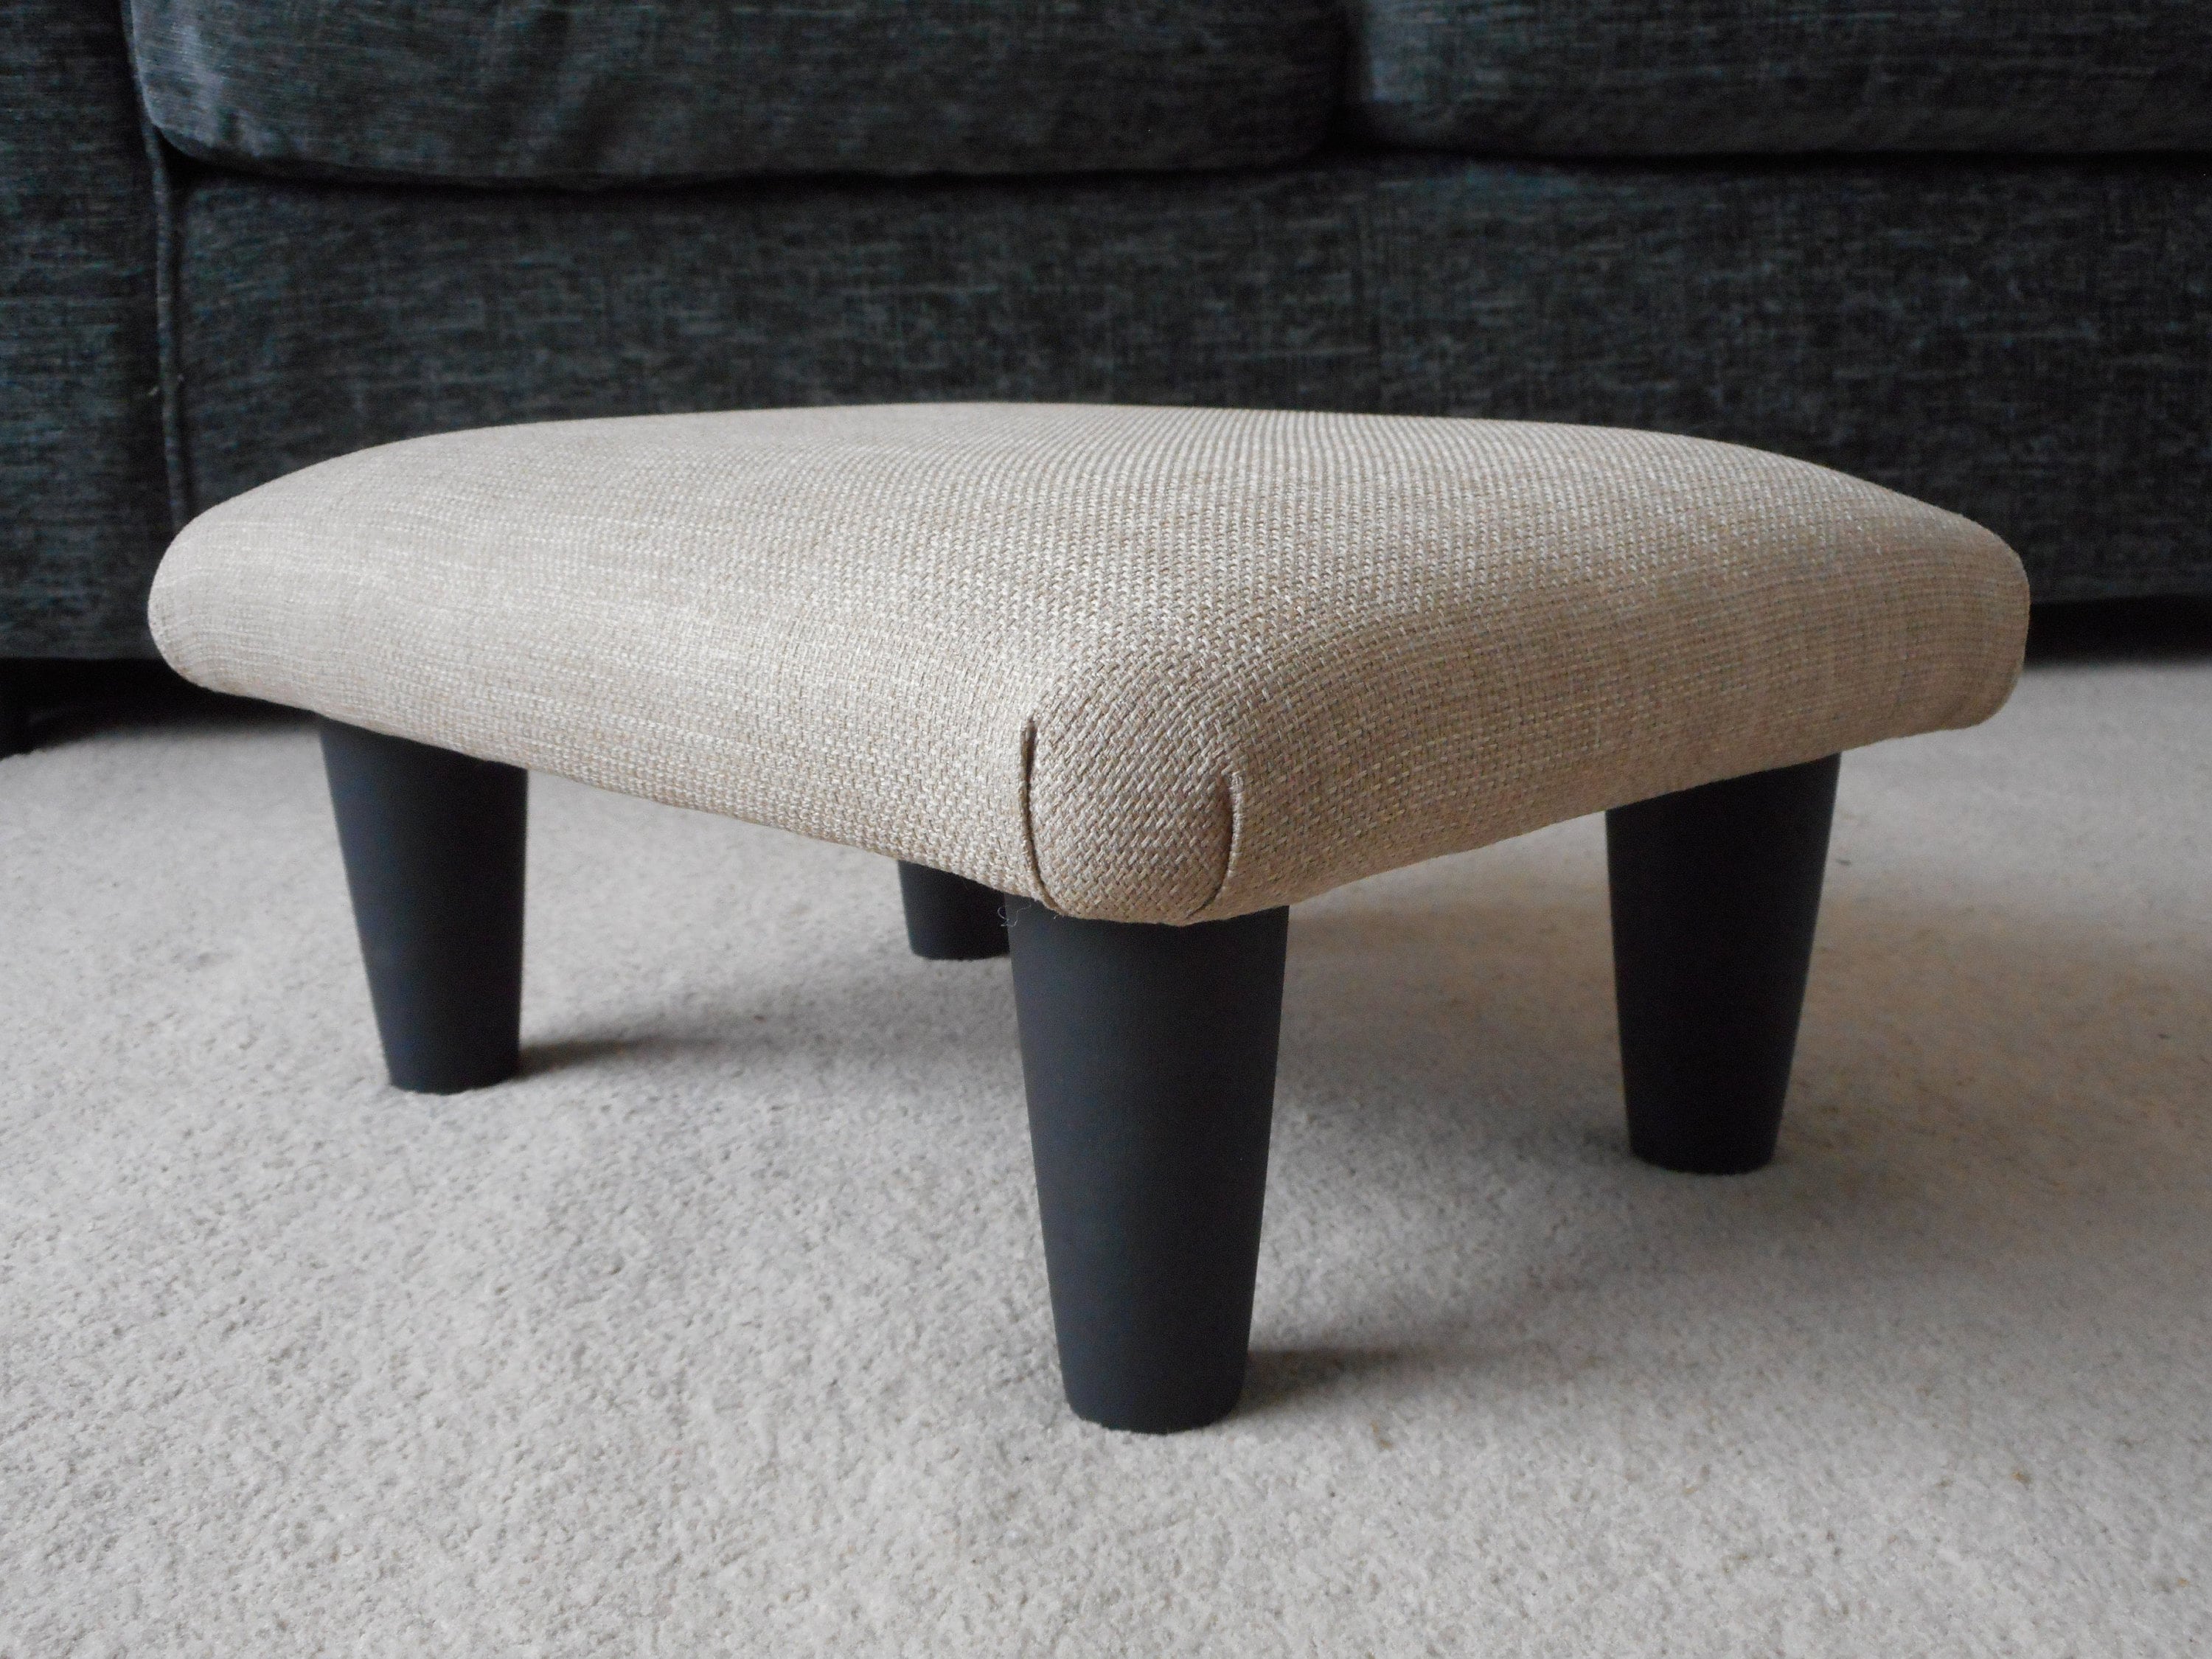 NEW Small Between 10-26 Cm 410 Solid Plain Footstool With Wooden